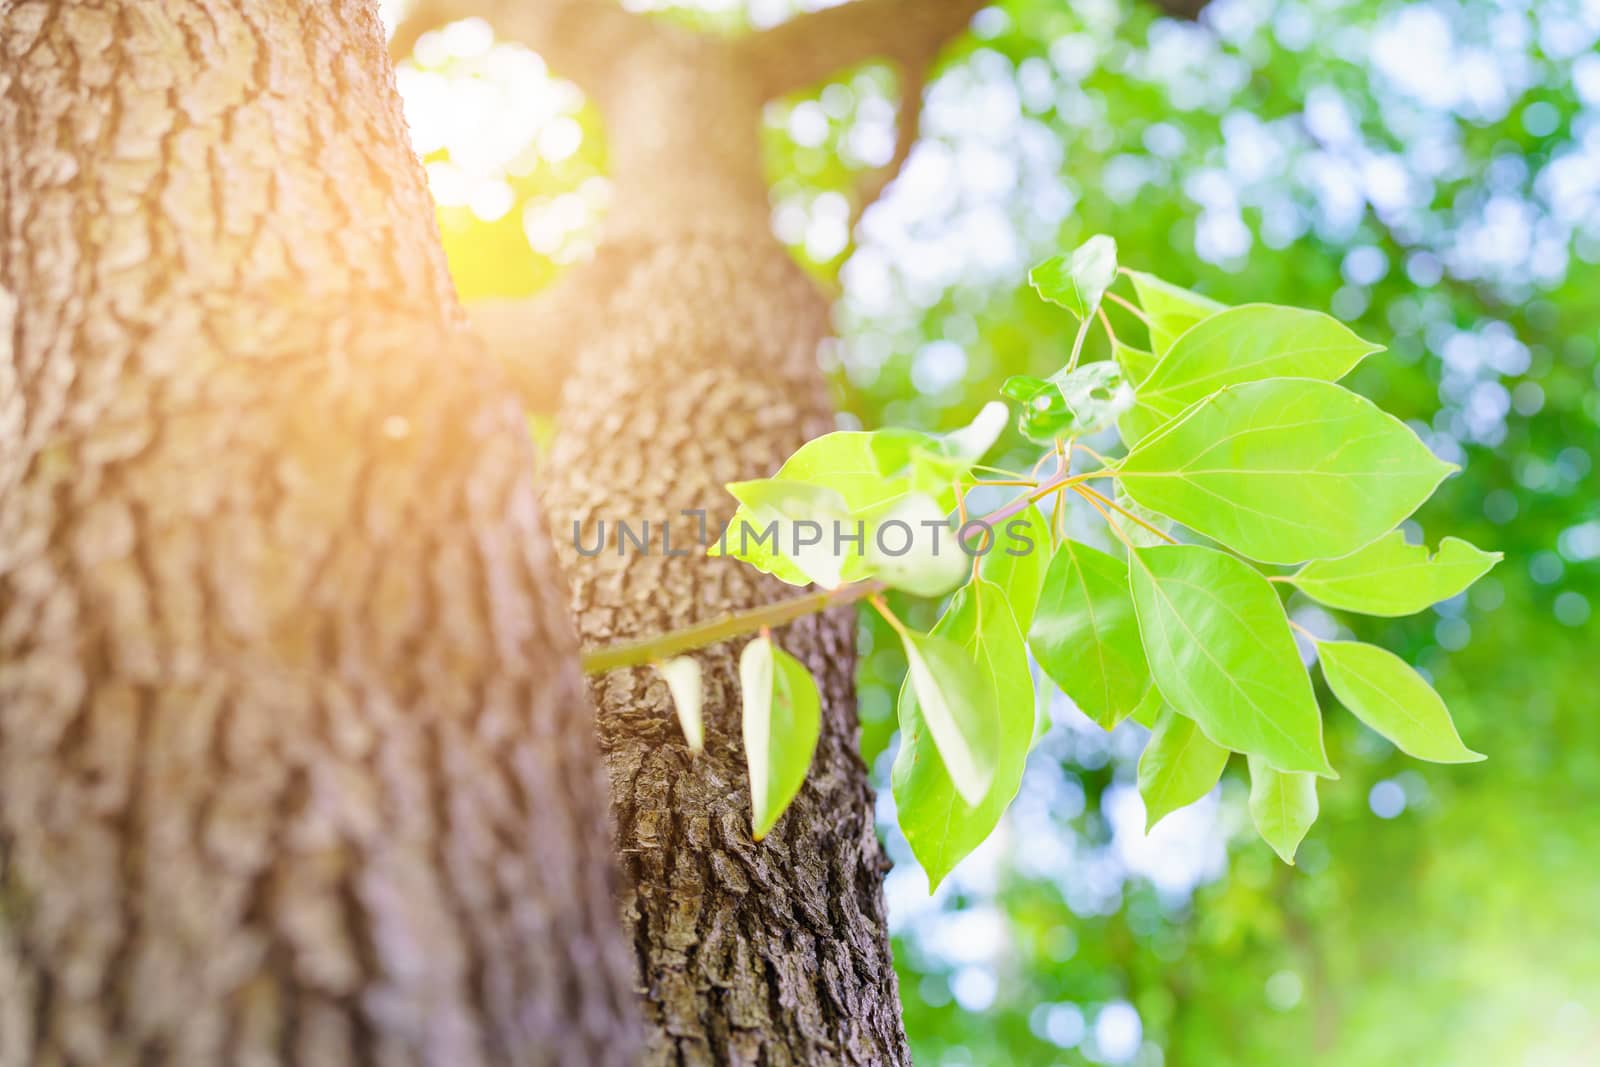 new life, new born green leave growth on the old tree, summer concept